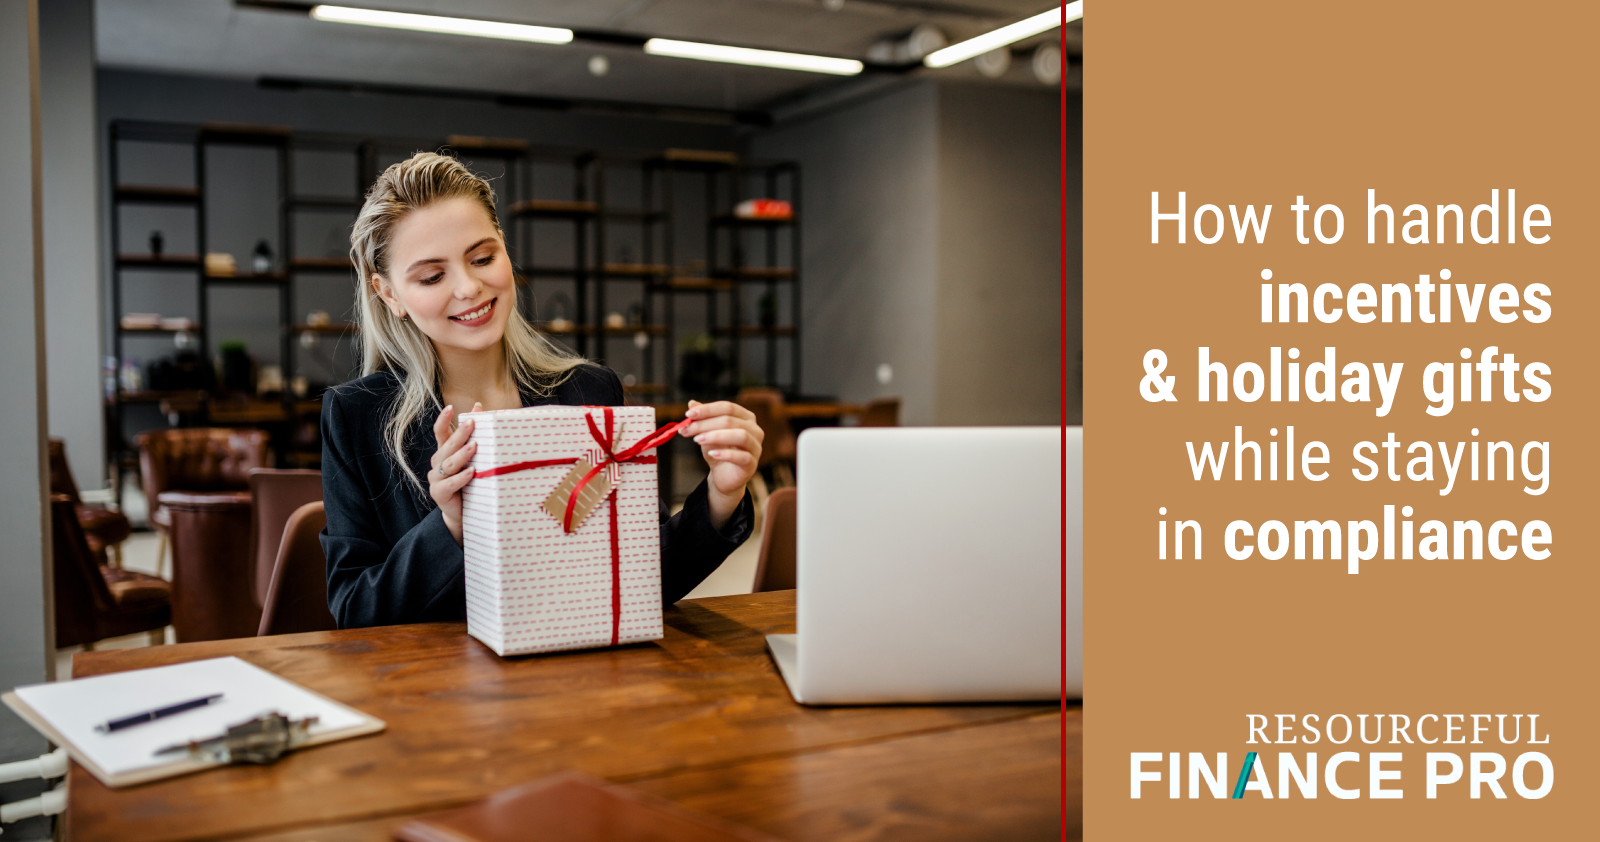 How To Handle Incentives And Holiday Gifts While Staying In Compliance